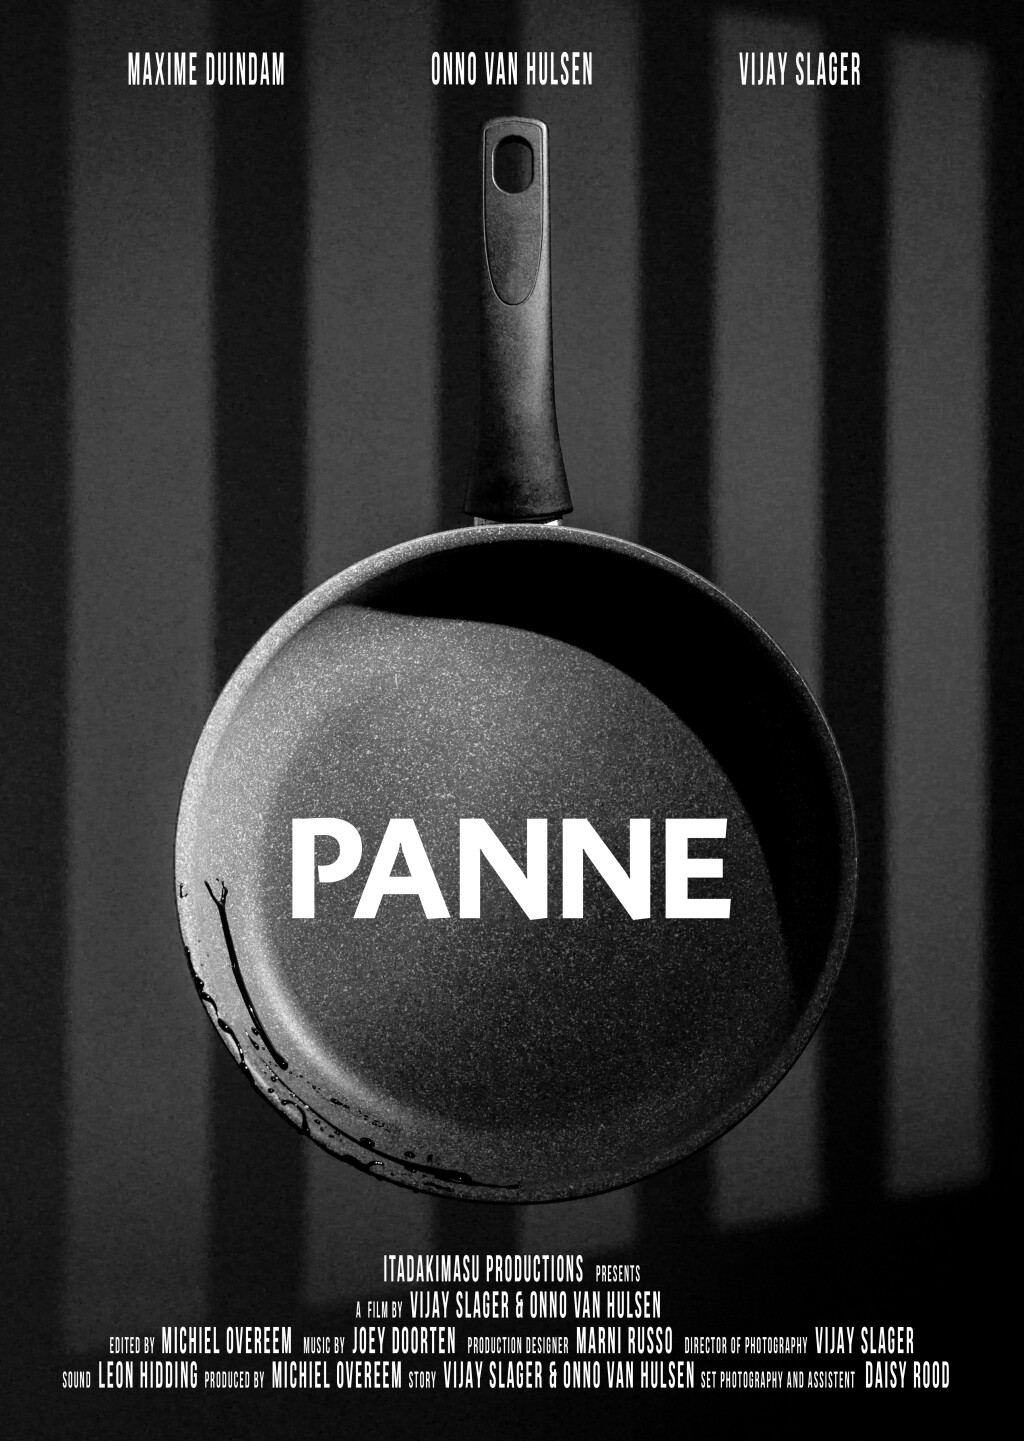 Filmposter for Panne